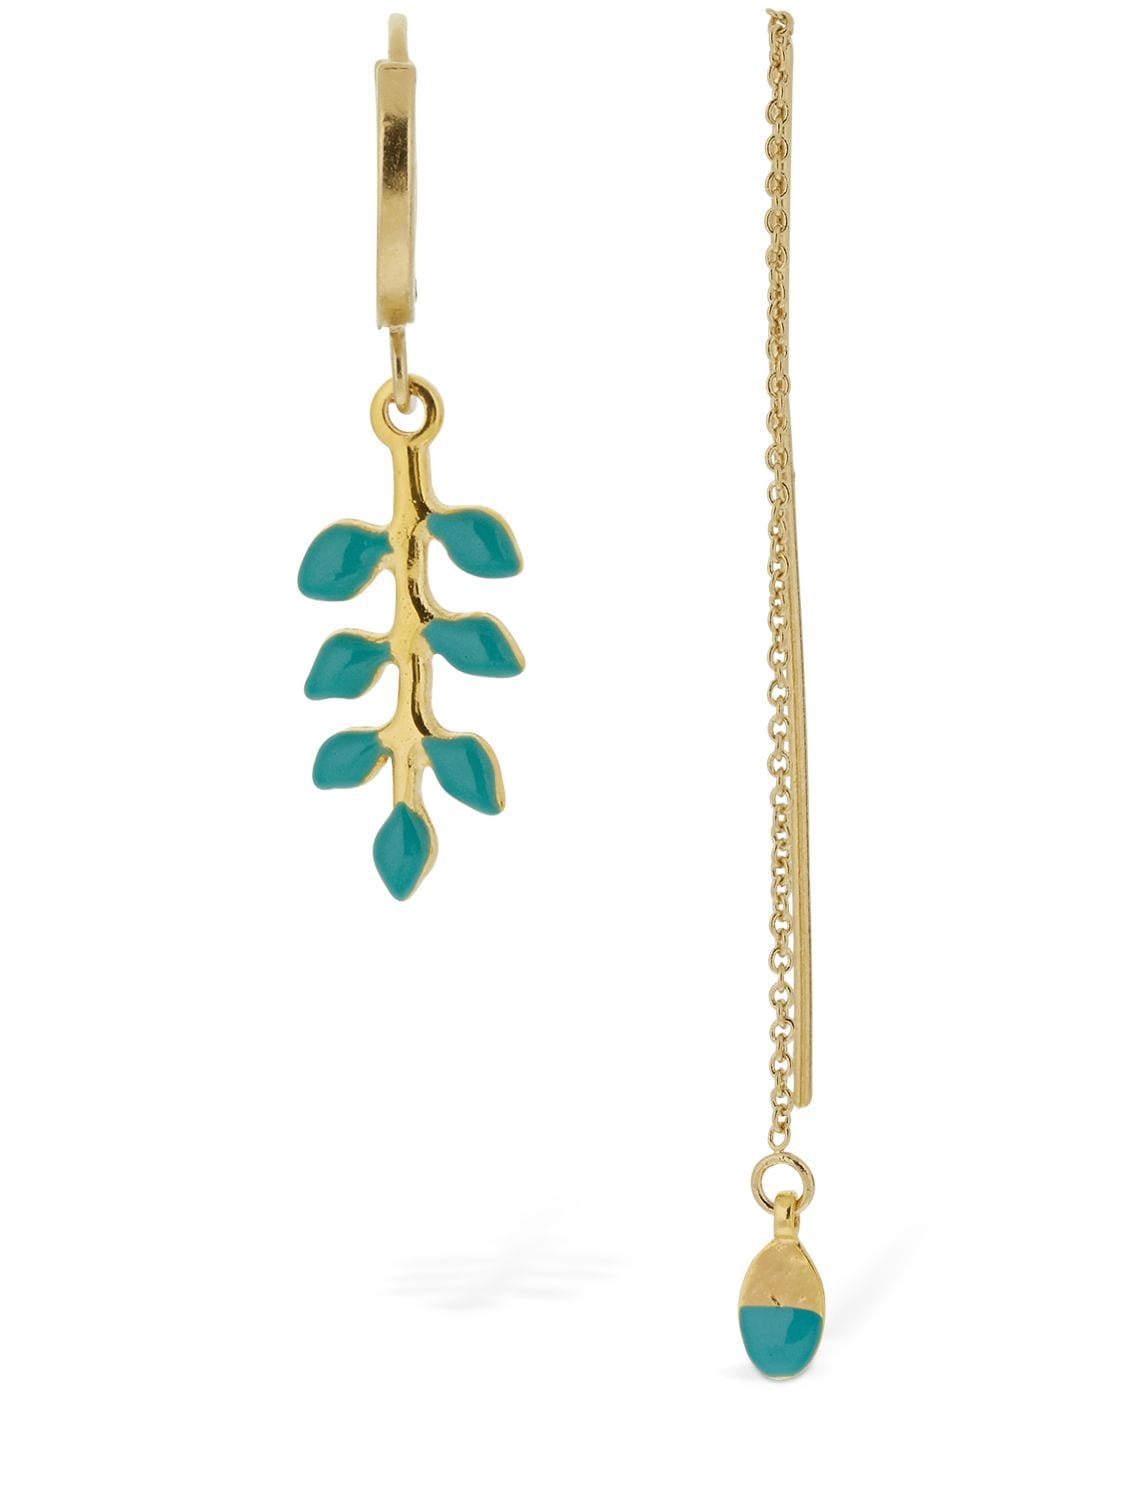 Isabel Marant New Leaves Mismatched Earrings In Gold,green